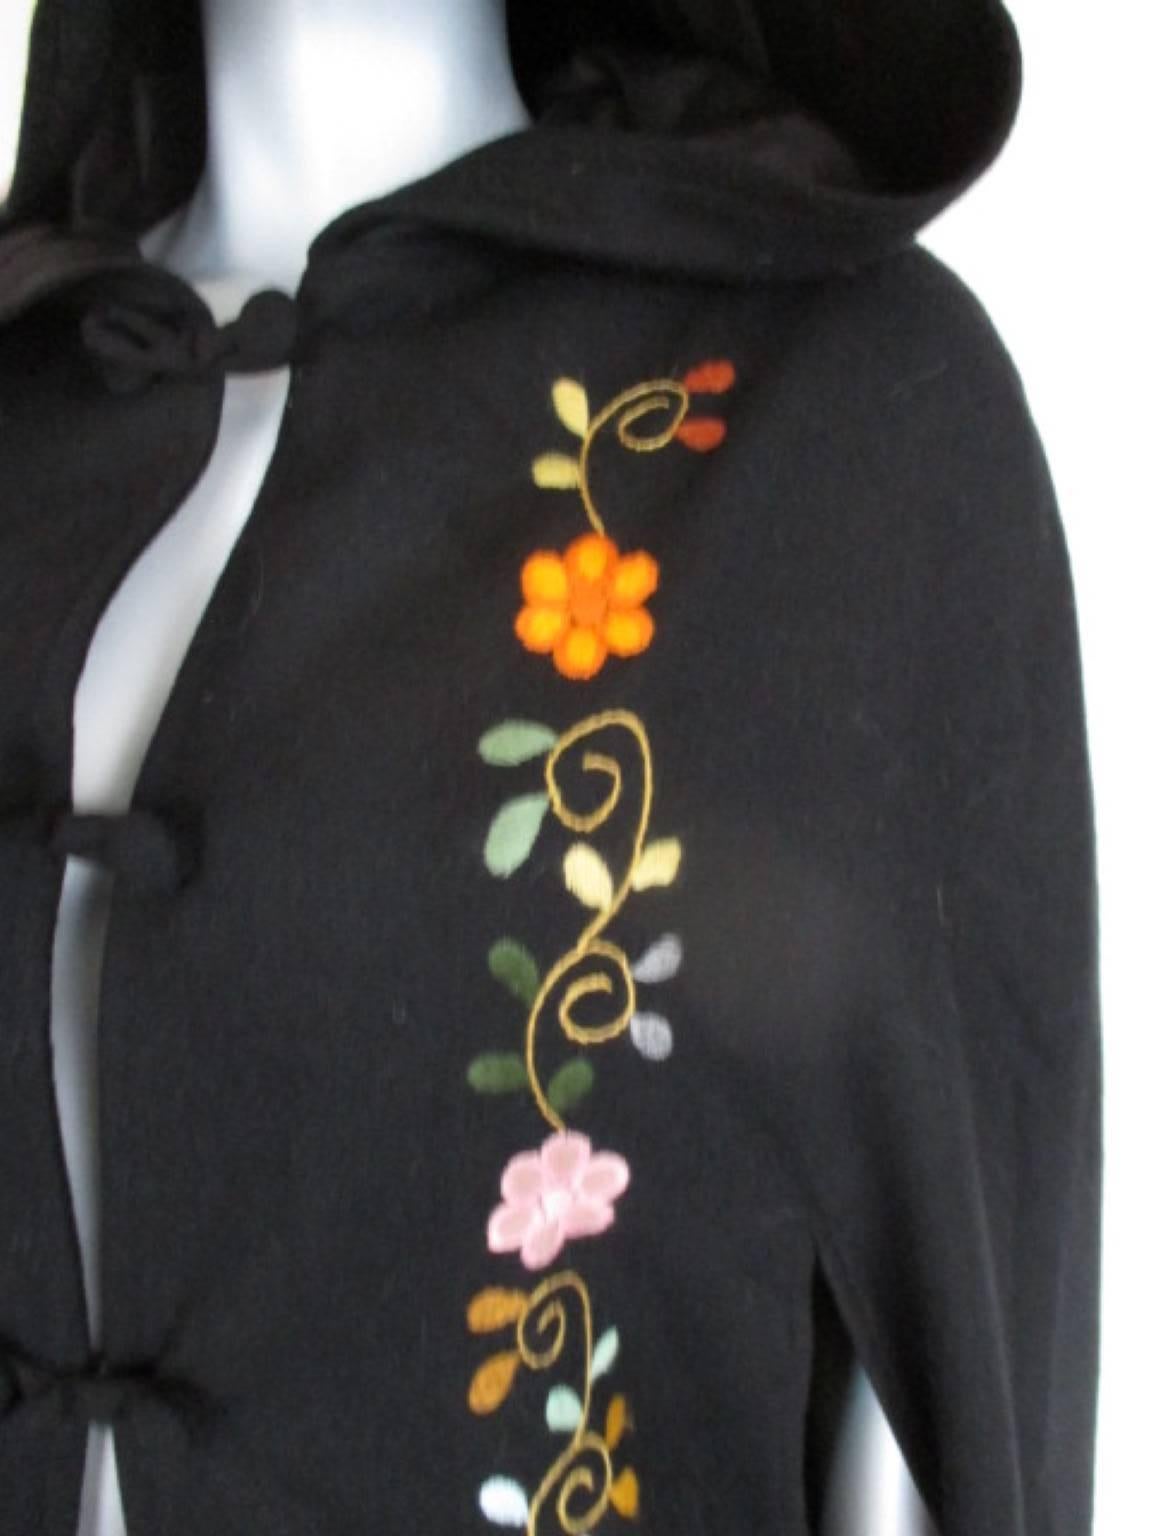 This beautiful cape is embroided with flowers in the front, back and at the hood.
Its in good vintage condition.
One size

Please note that vintage items are not new and therefore might have minor imperfections.

